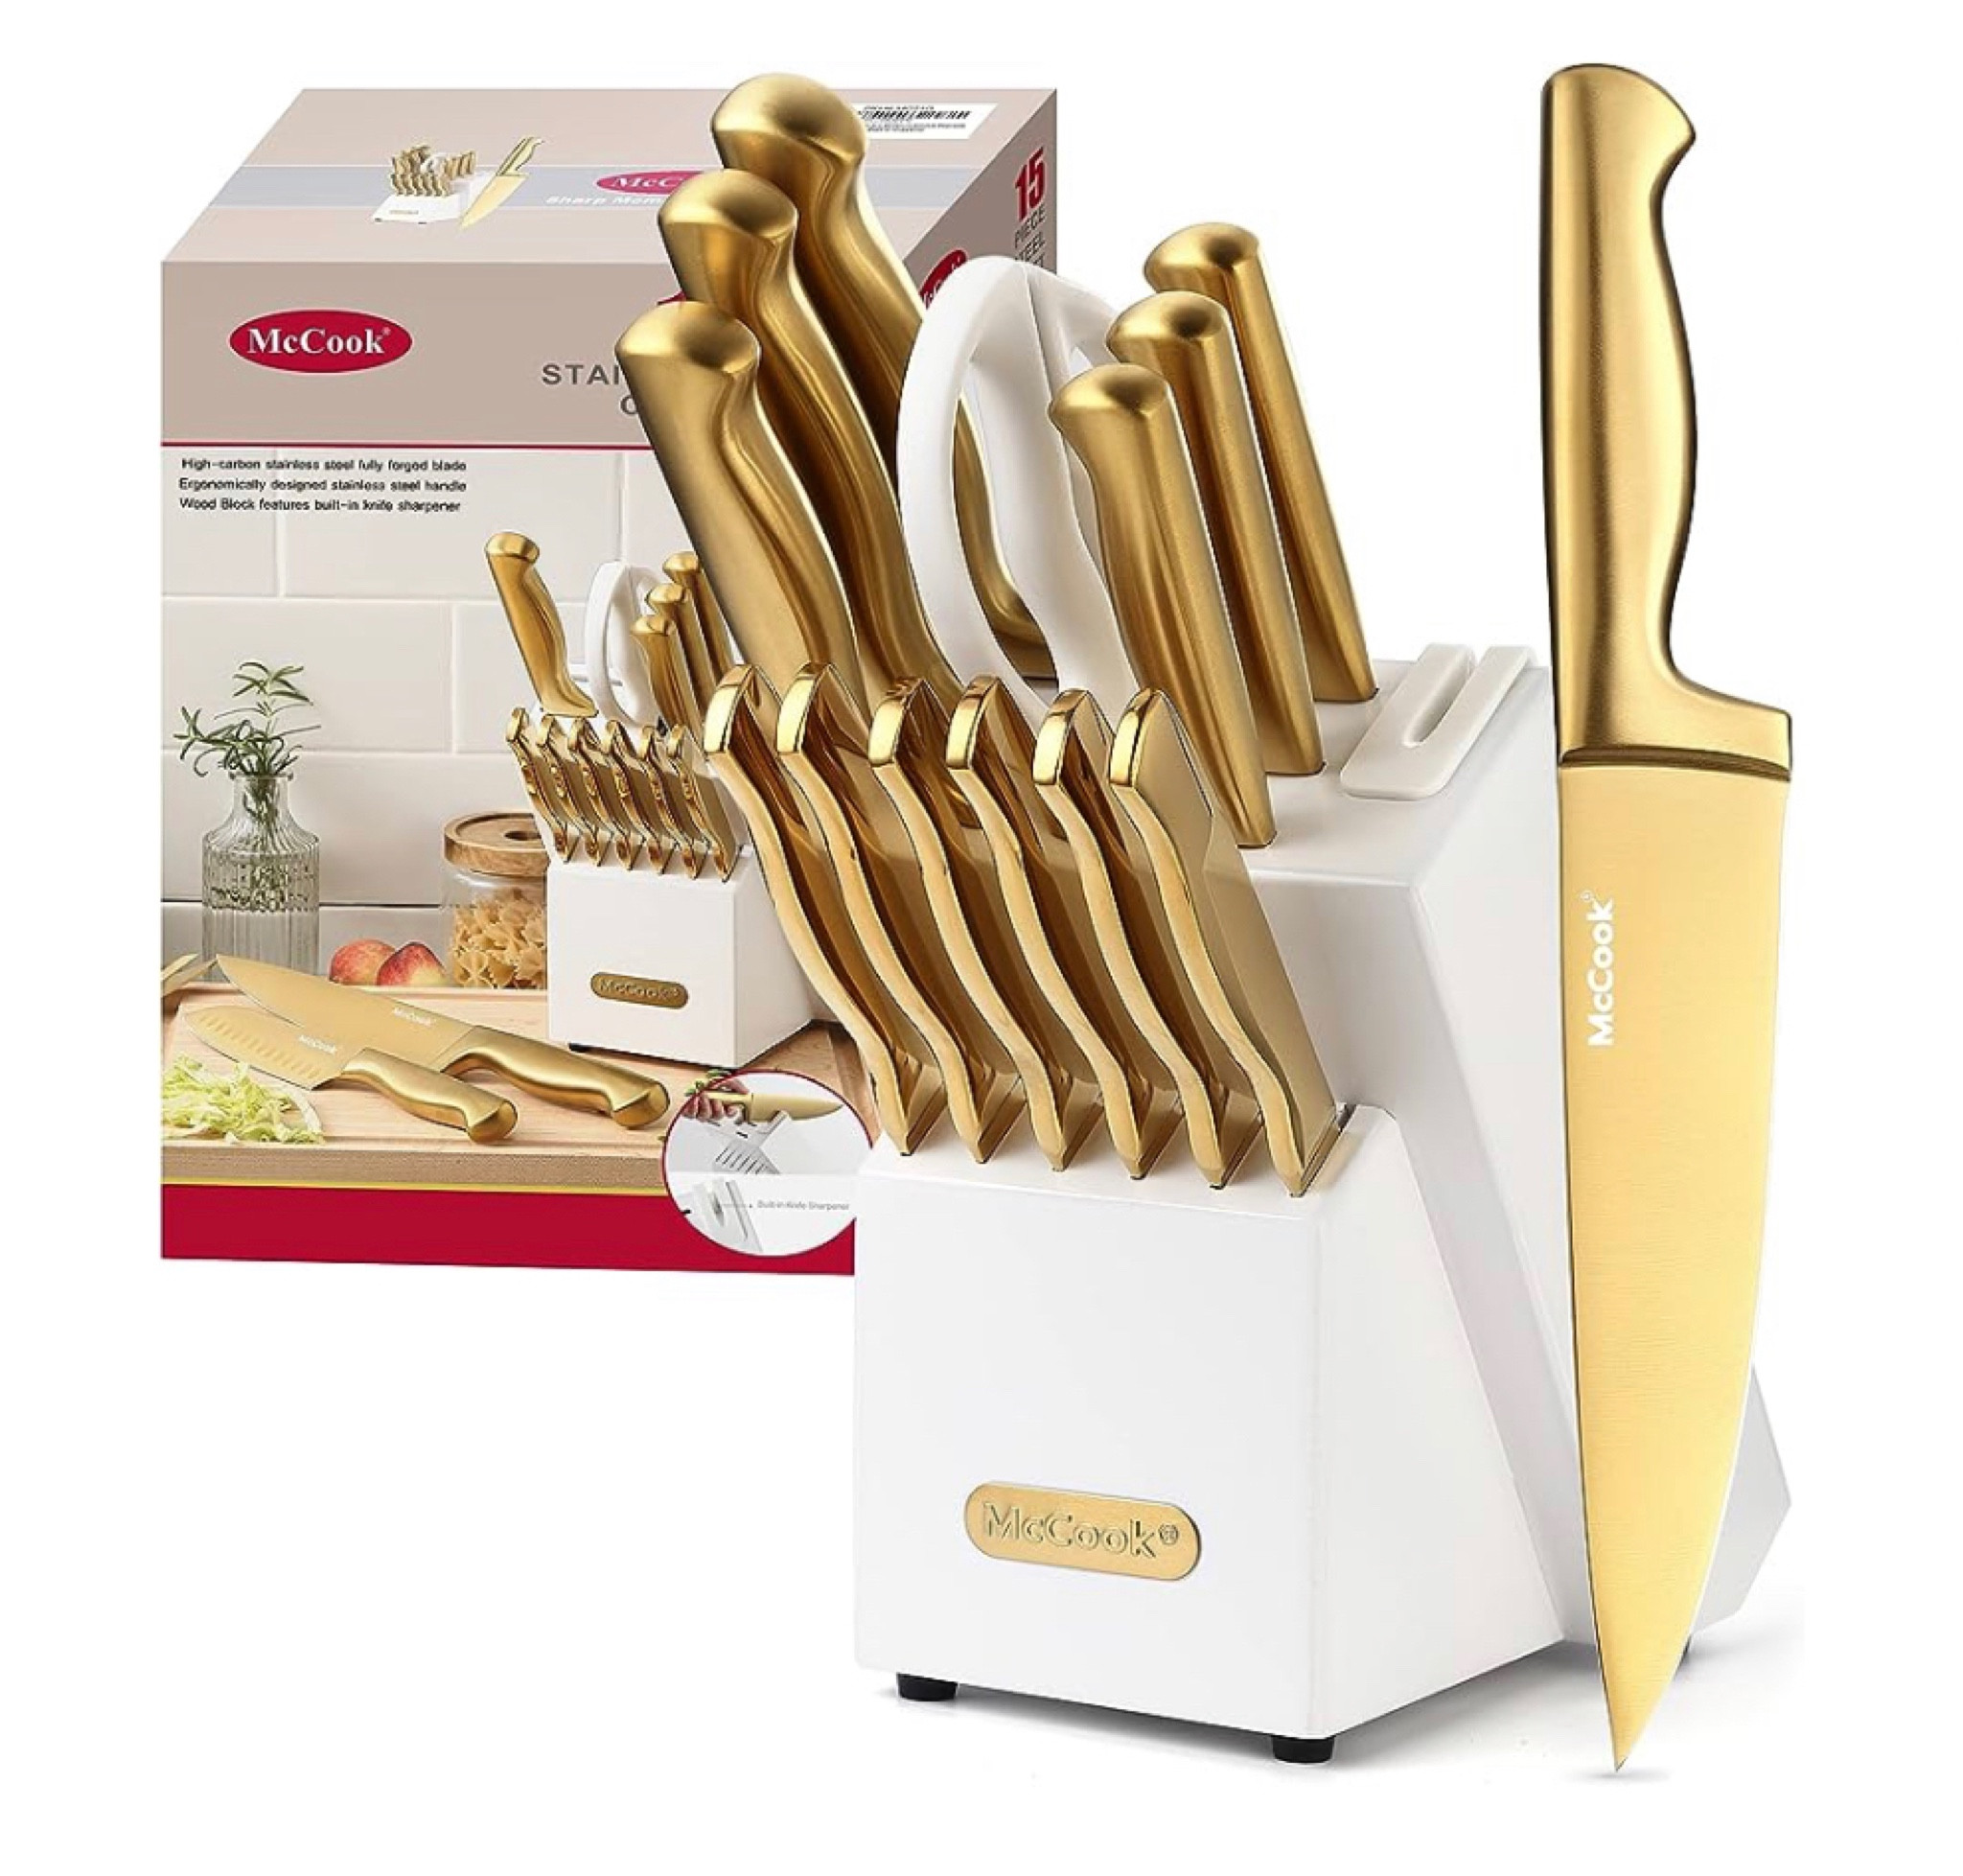 Marco Almond Golden Titanium Knife Set with Acrylic Stand, Kitchen